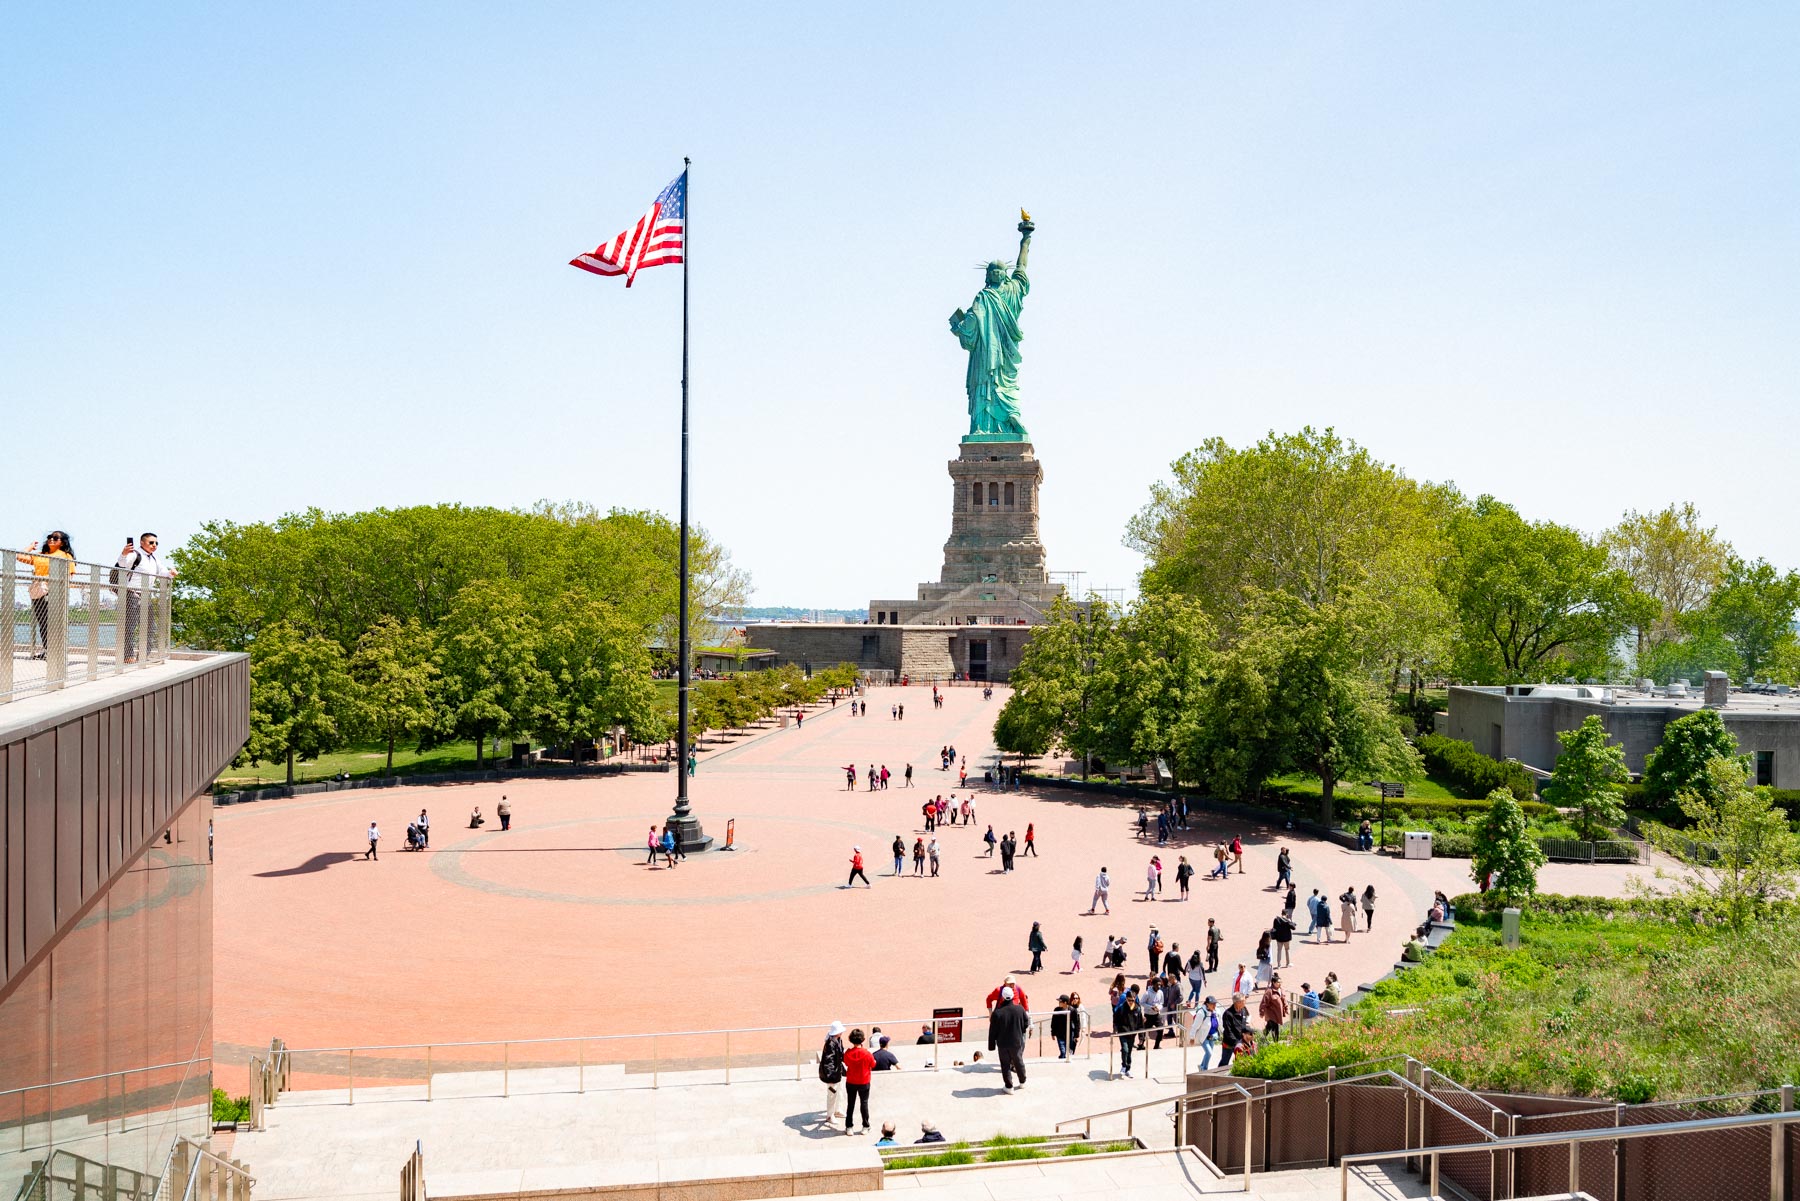 Flagpole Plaza at the statue of Liberty as seen from the museum on Liberty Island